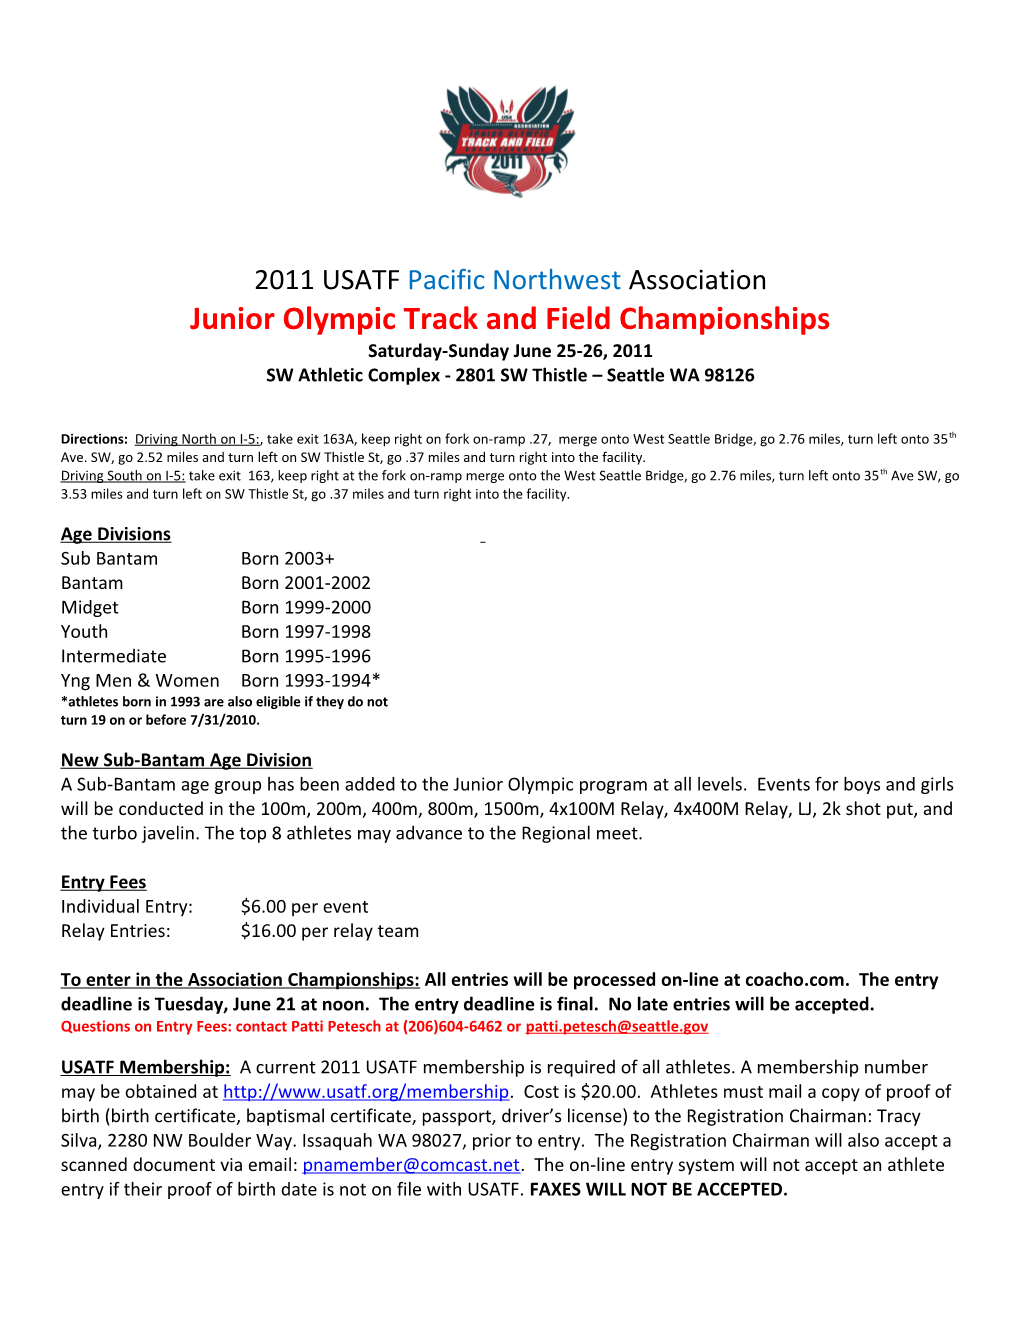 Junior Olympic Track and Fieldchampionships